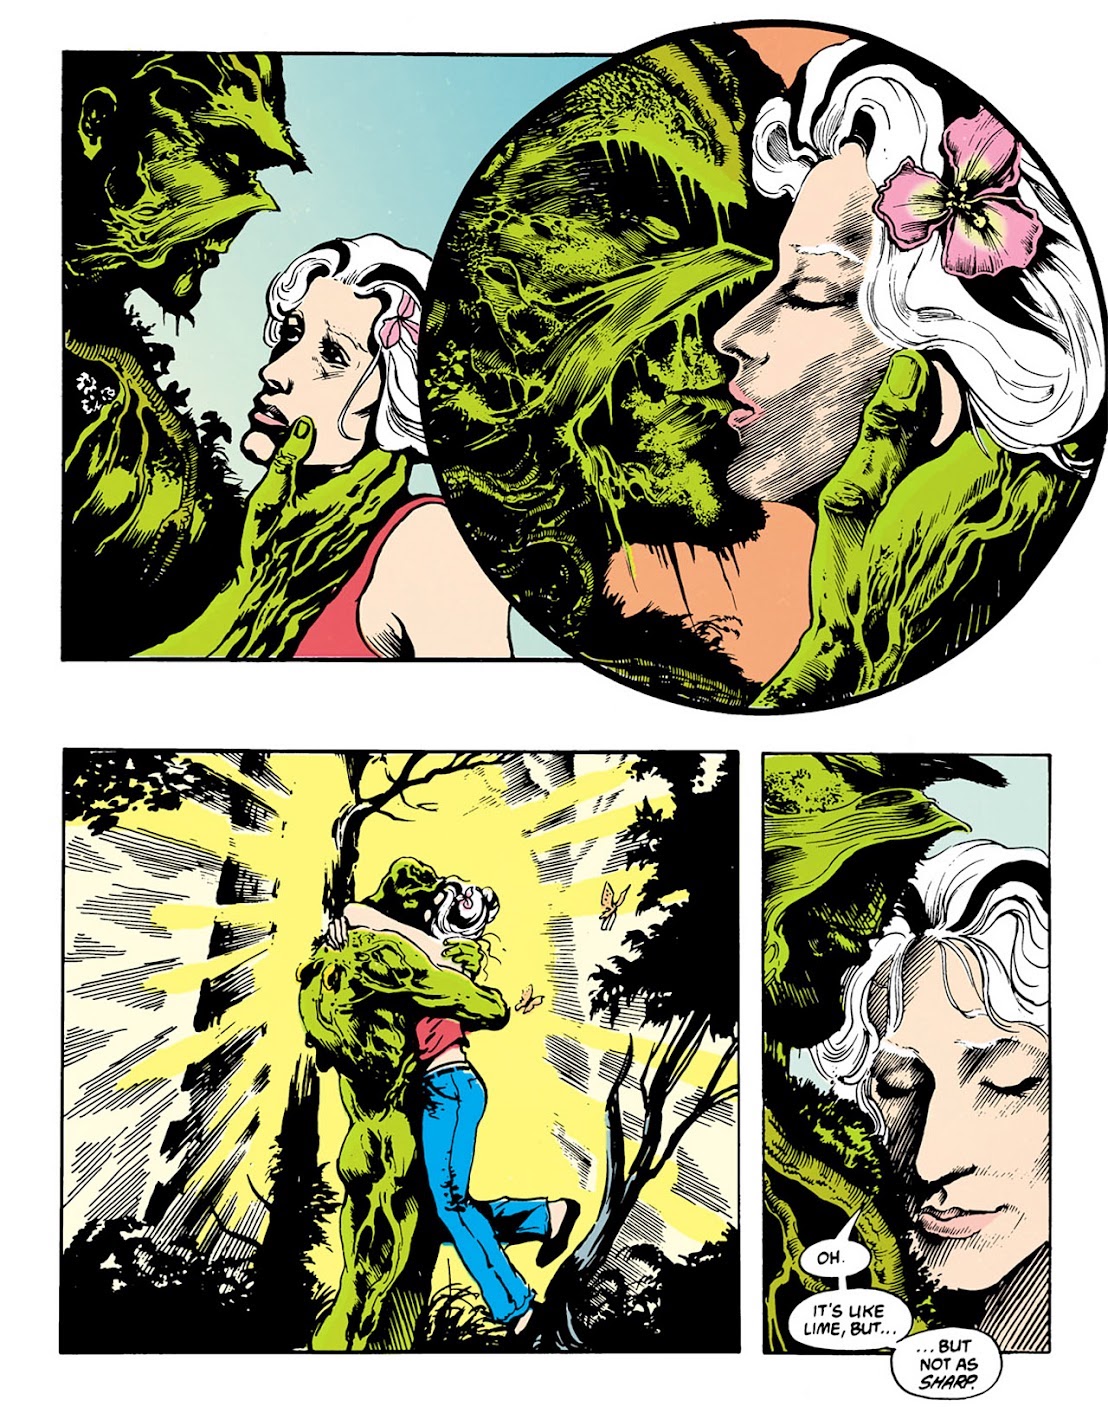 Swamp Thing #34 Might Be The Most Erotic, Sex-Positive Comic Book Of All Time